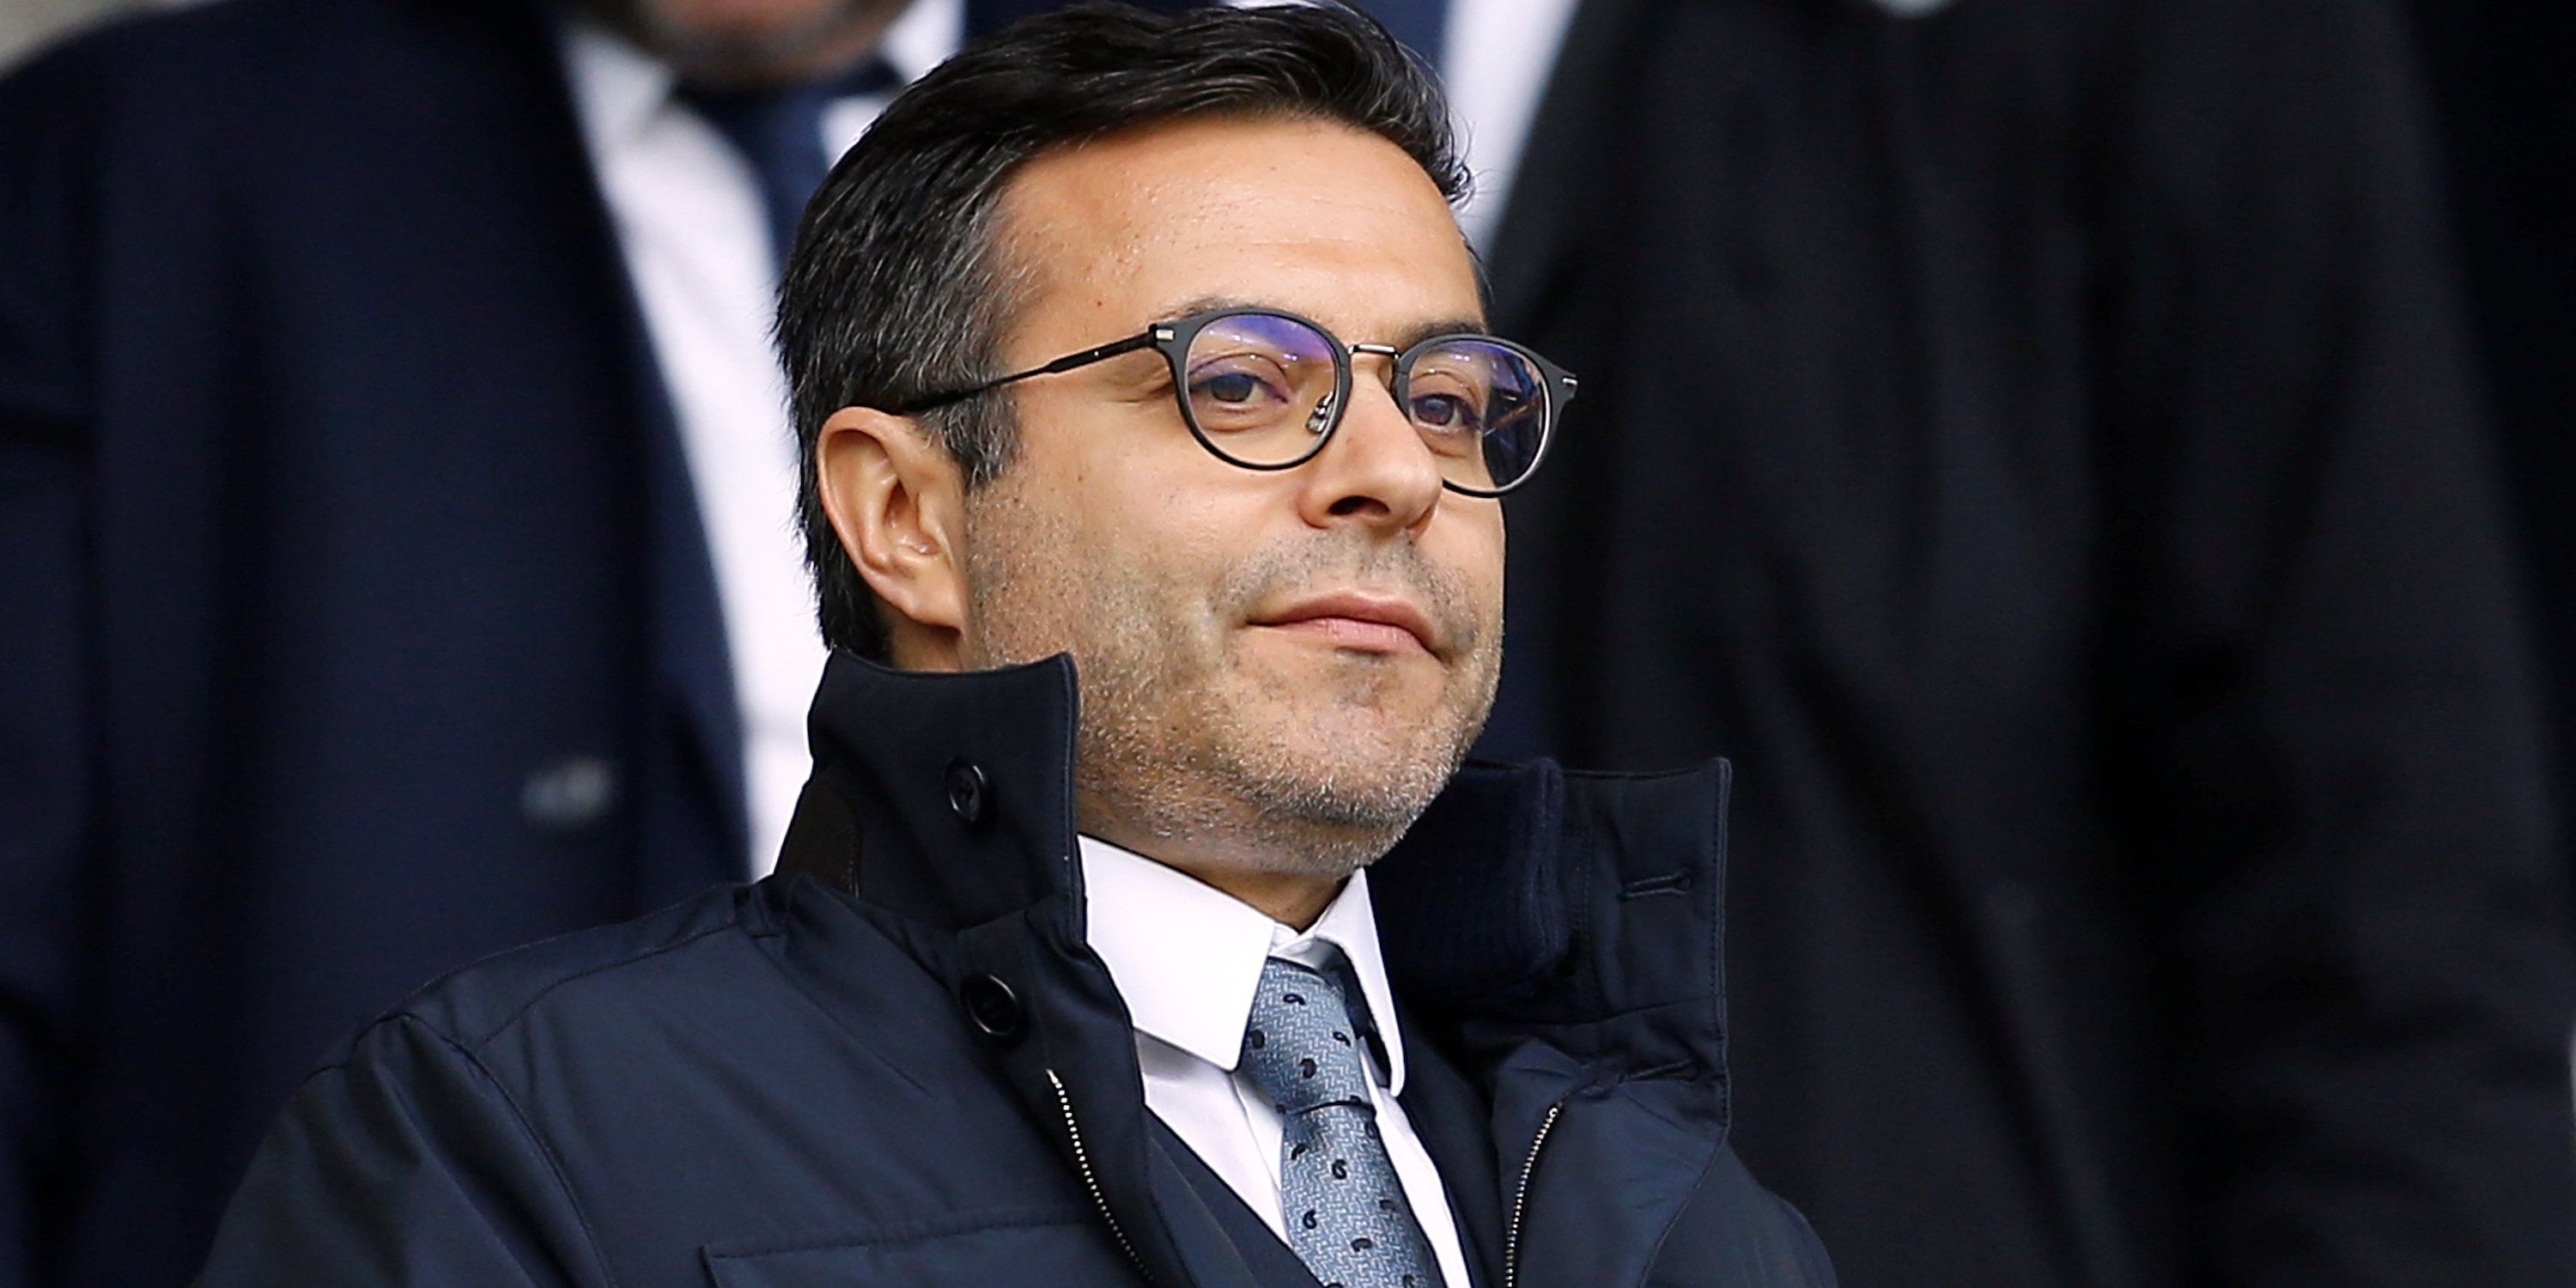 Leeds United chairman Andrea Radrizzani looks on from the stands